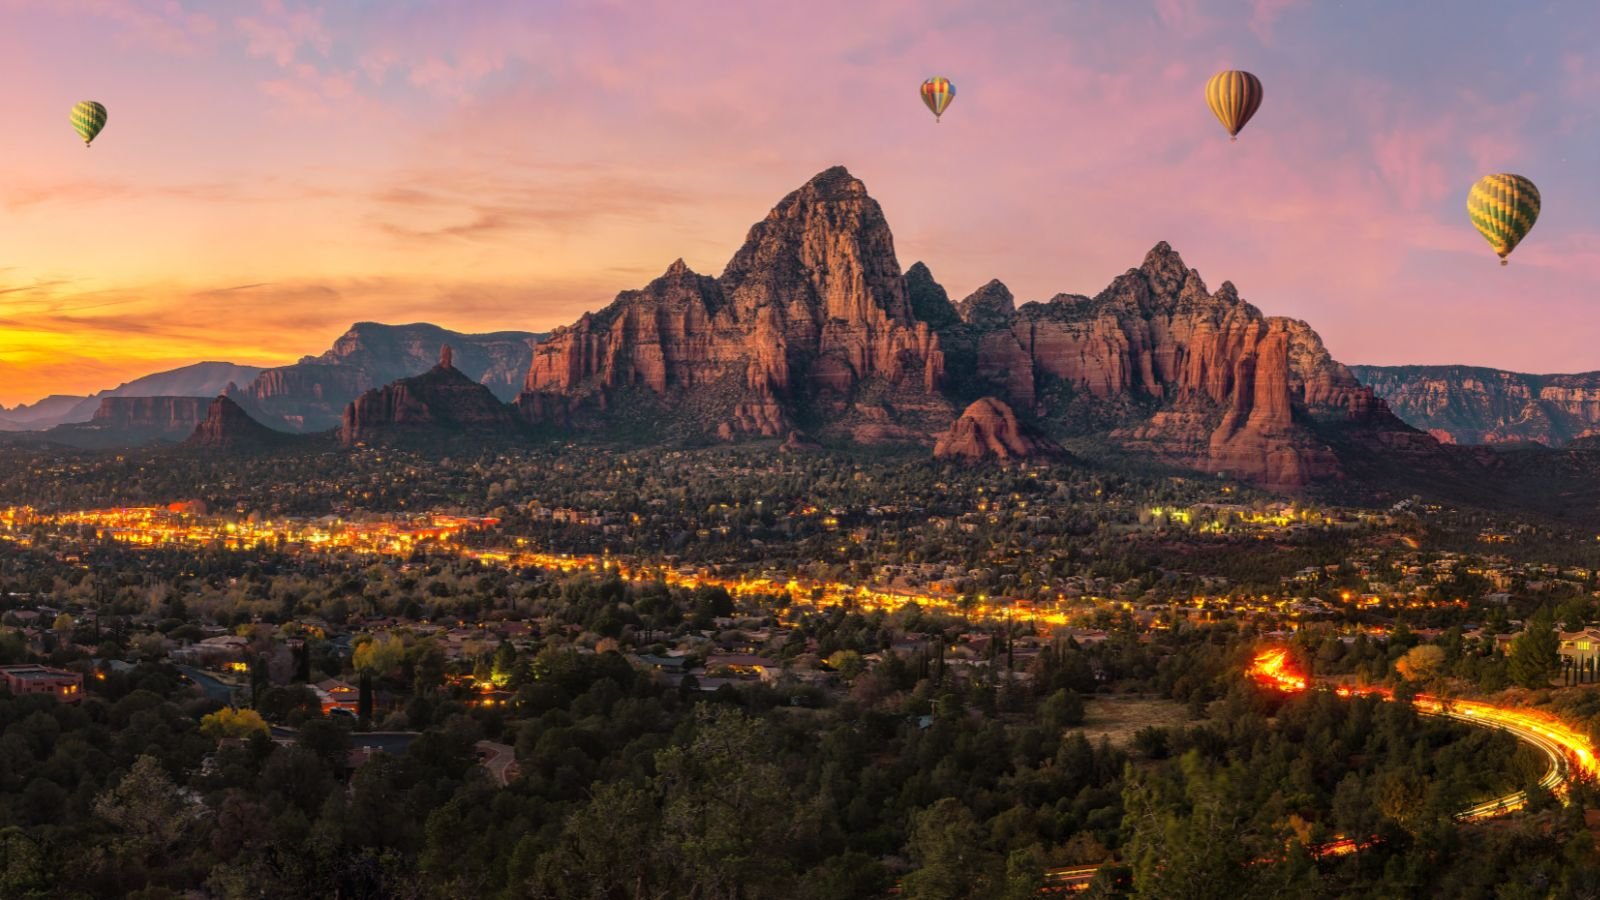 <p>Sedona’s majestic red rock formations create a great opportunity for outdoor adventures. Hike the scenic Cathedral Rock Trail or challenge yourself on the iconic Devil’s Bridge. Drive along the stunning Red Rock Scenic Byway. Alternatively, you can explore the Bell Rock’s mystical energy or Oak Creek Canyon’s natural beauty.</p>